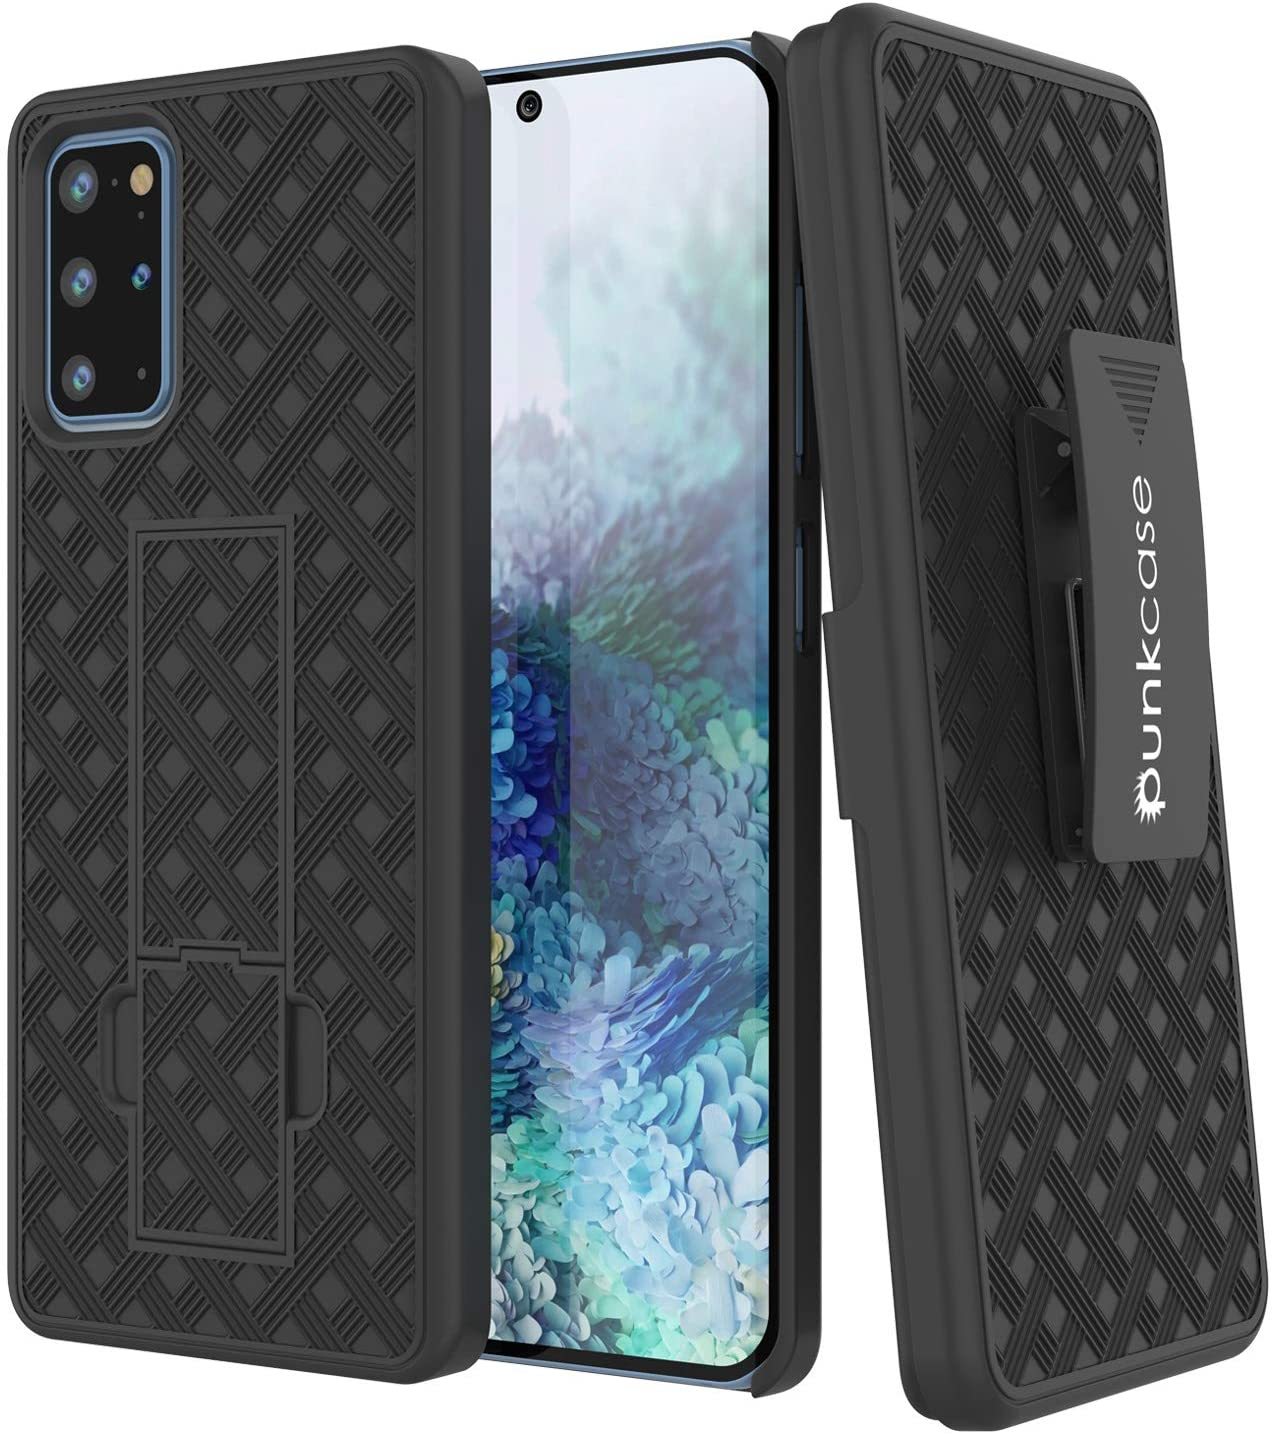 Punkcase Galaxy S20+ Plus Case With Screen Protector, Holster Belt Clip [Black]